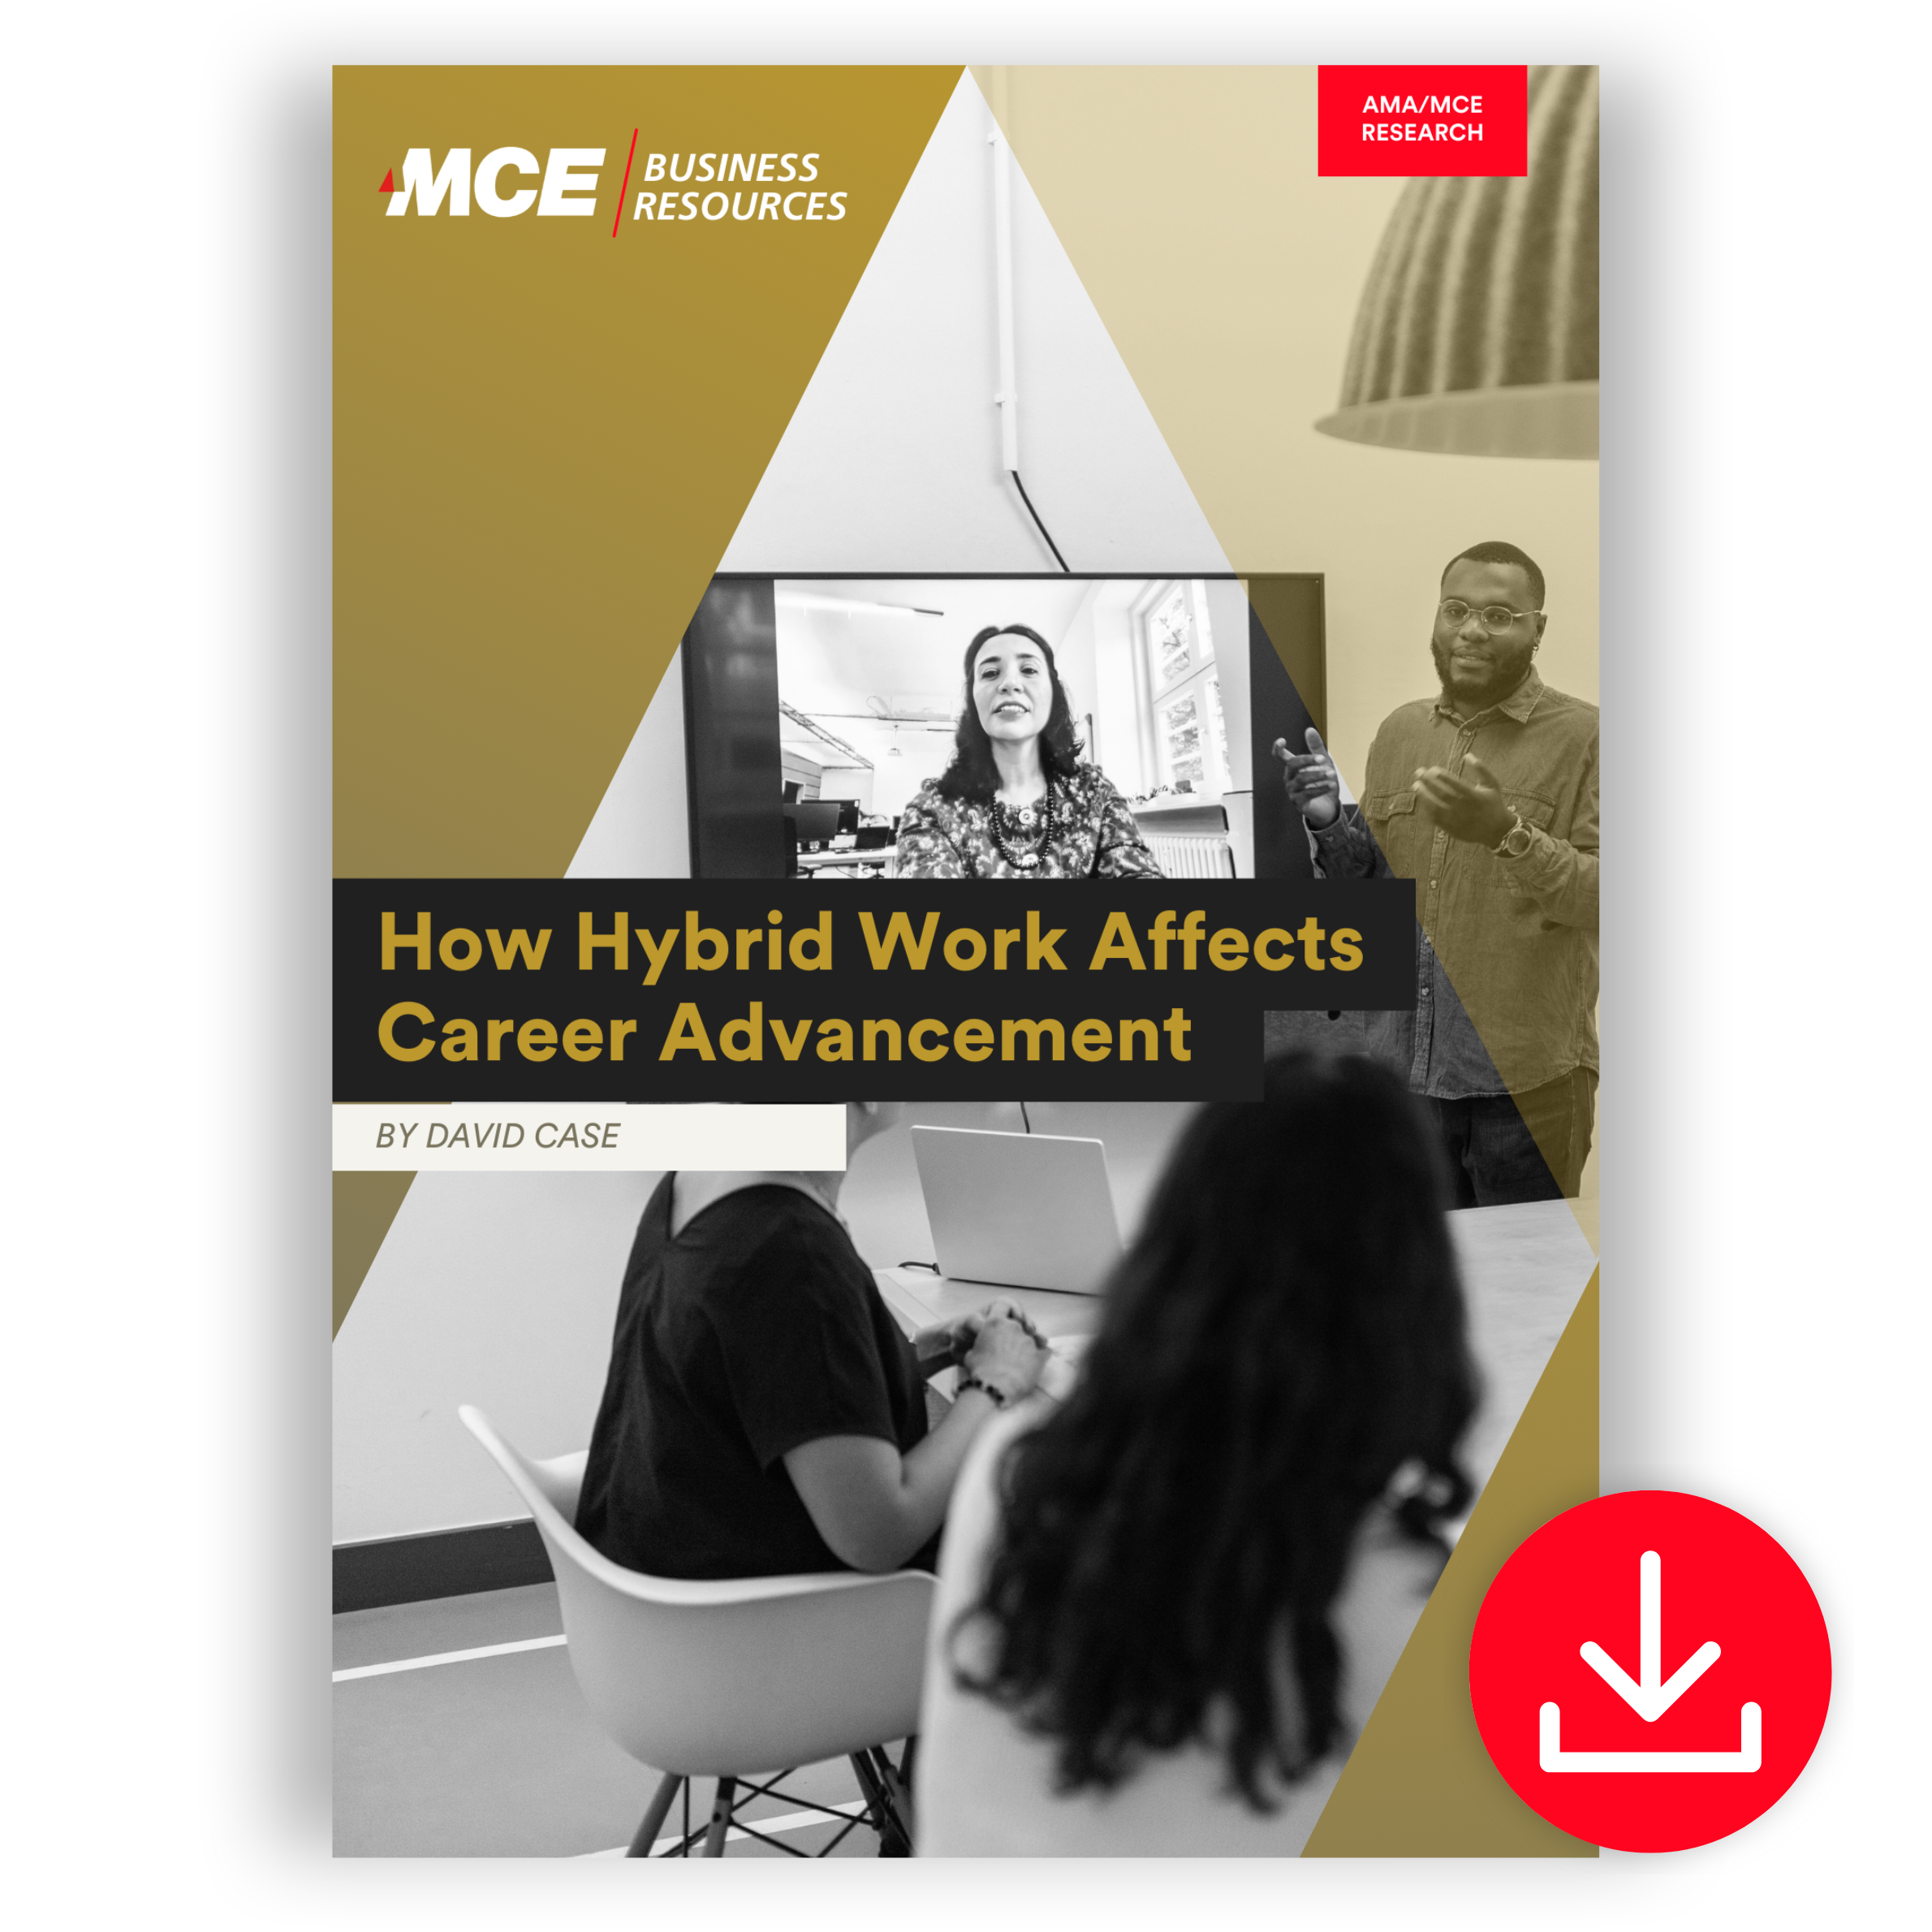 How Hybrid Work Affects Career Advancement